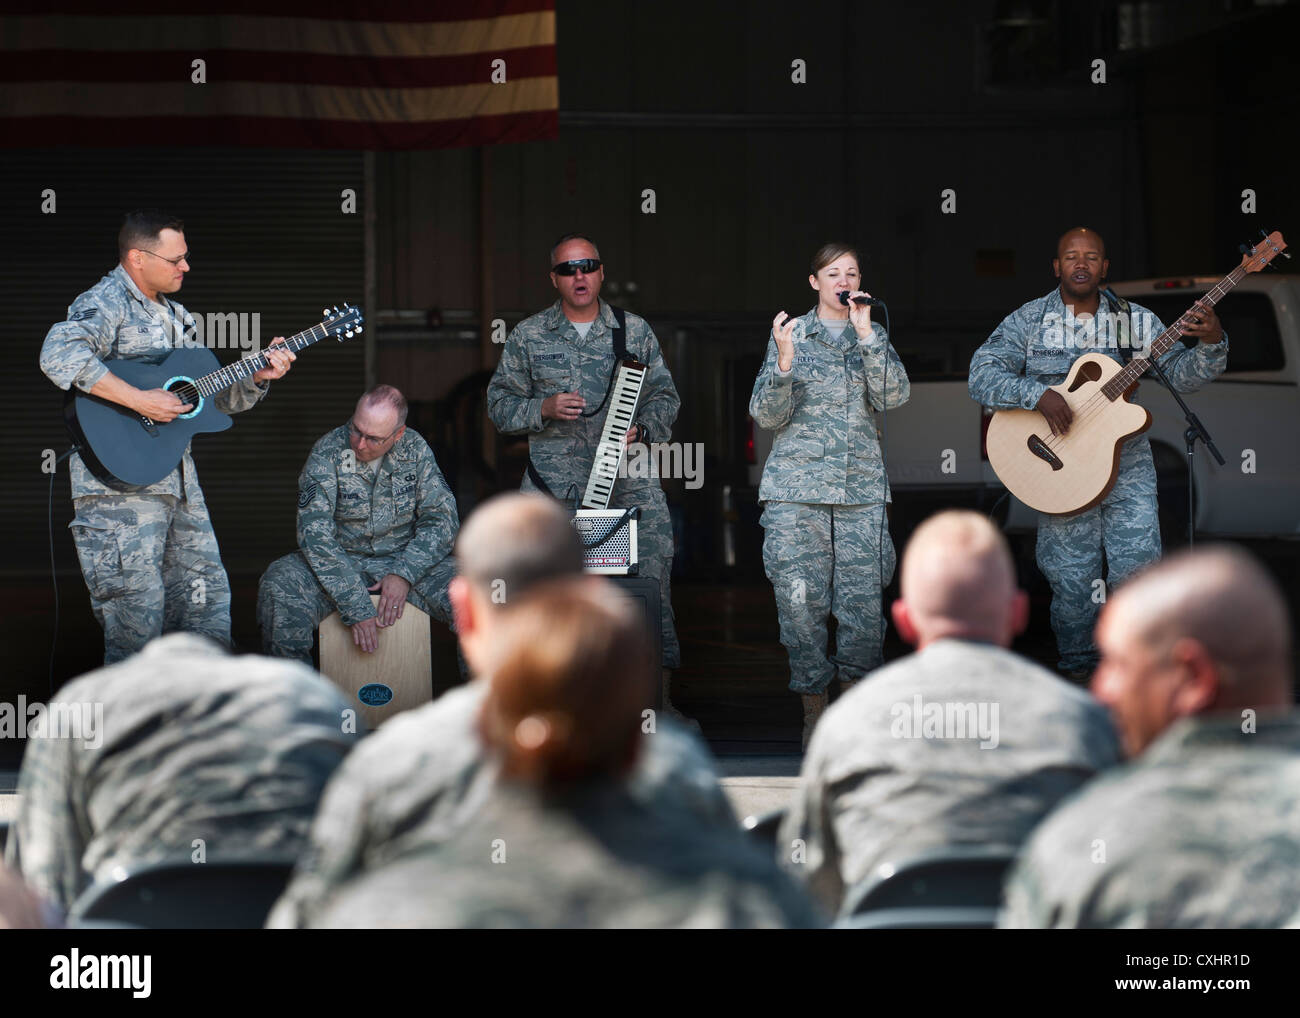 The U.S. Air Forces Central Band 'Top Flight' performs at the Transit Center at Manas, Kyrgyzstan, Sept. 22, 2012. This performance, which was held in the 376th Expeditionary Logistics Readiness Squadron facility, was played in conjunction with a BBQ to improve morale. Stock Photo